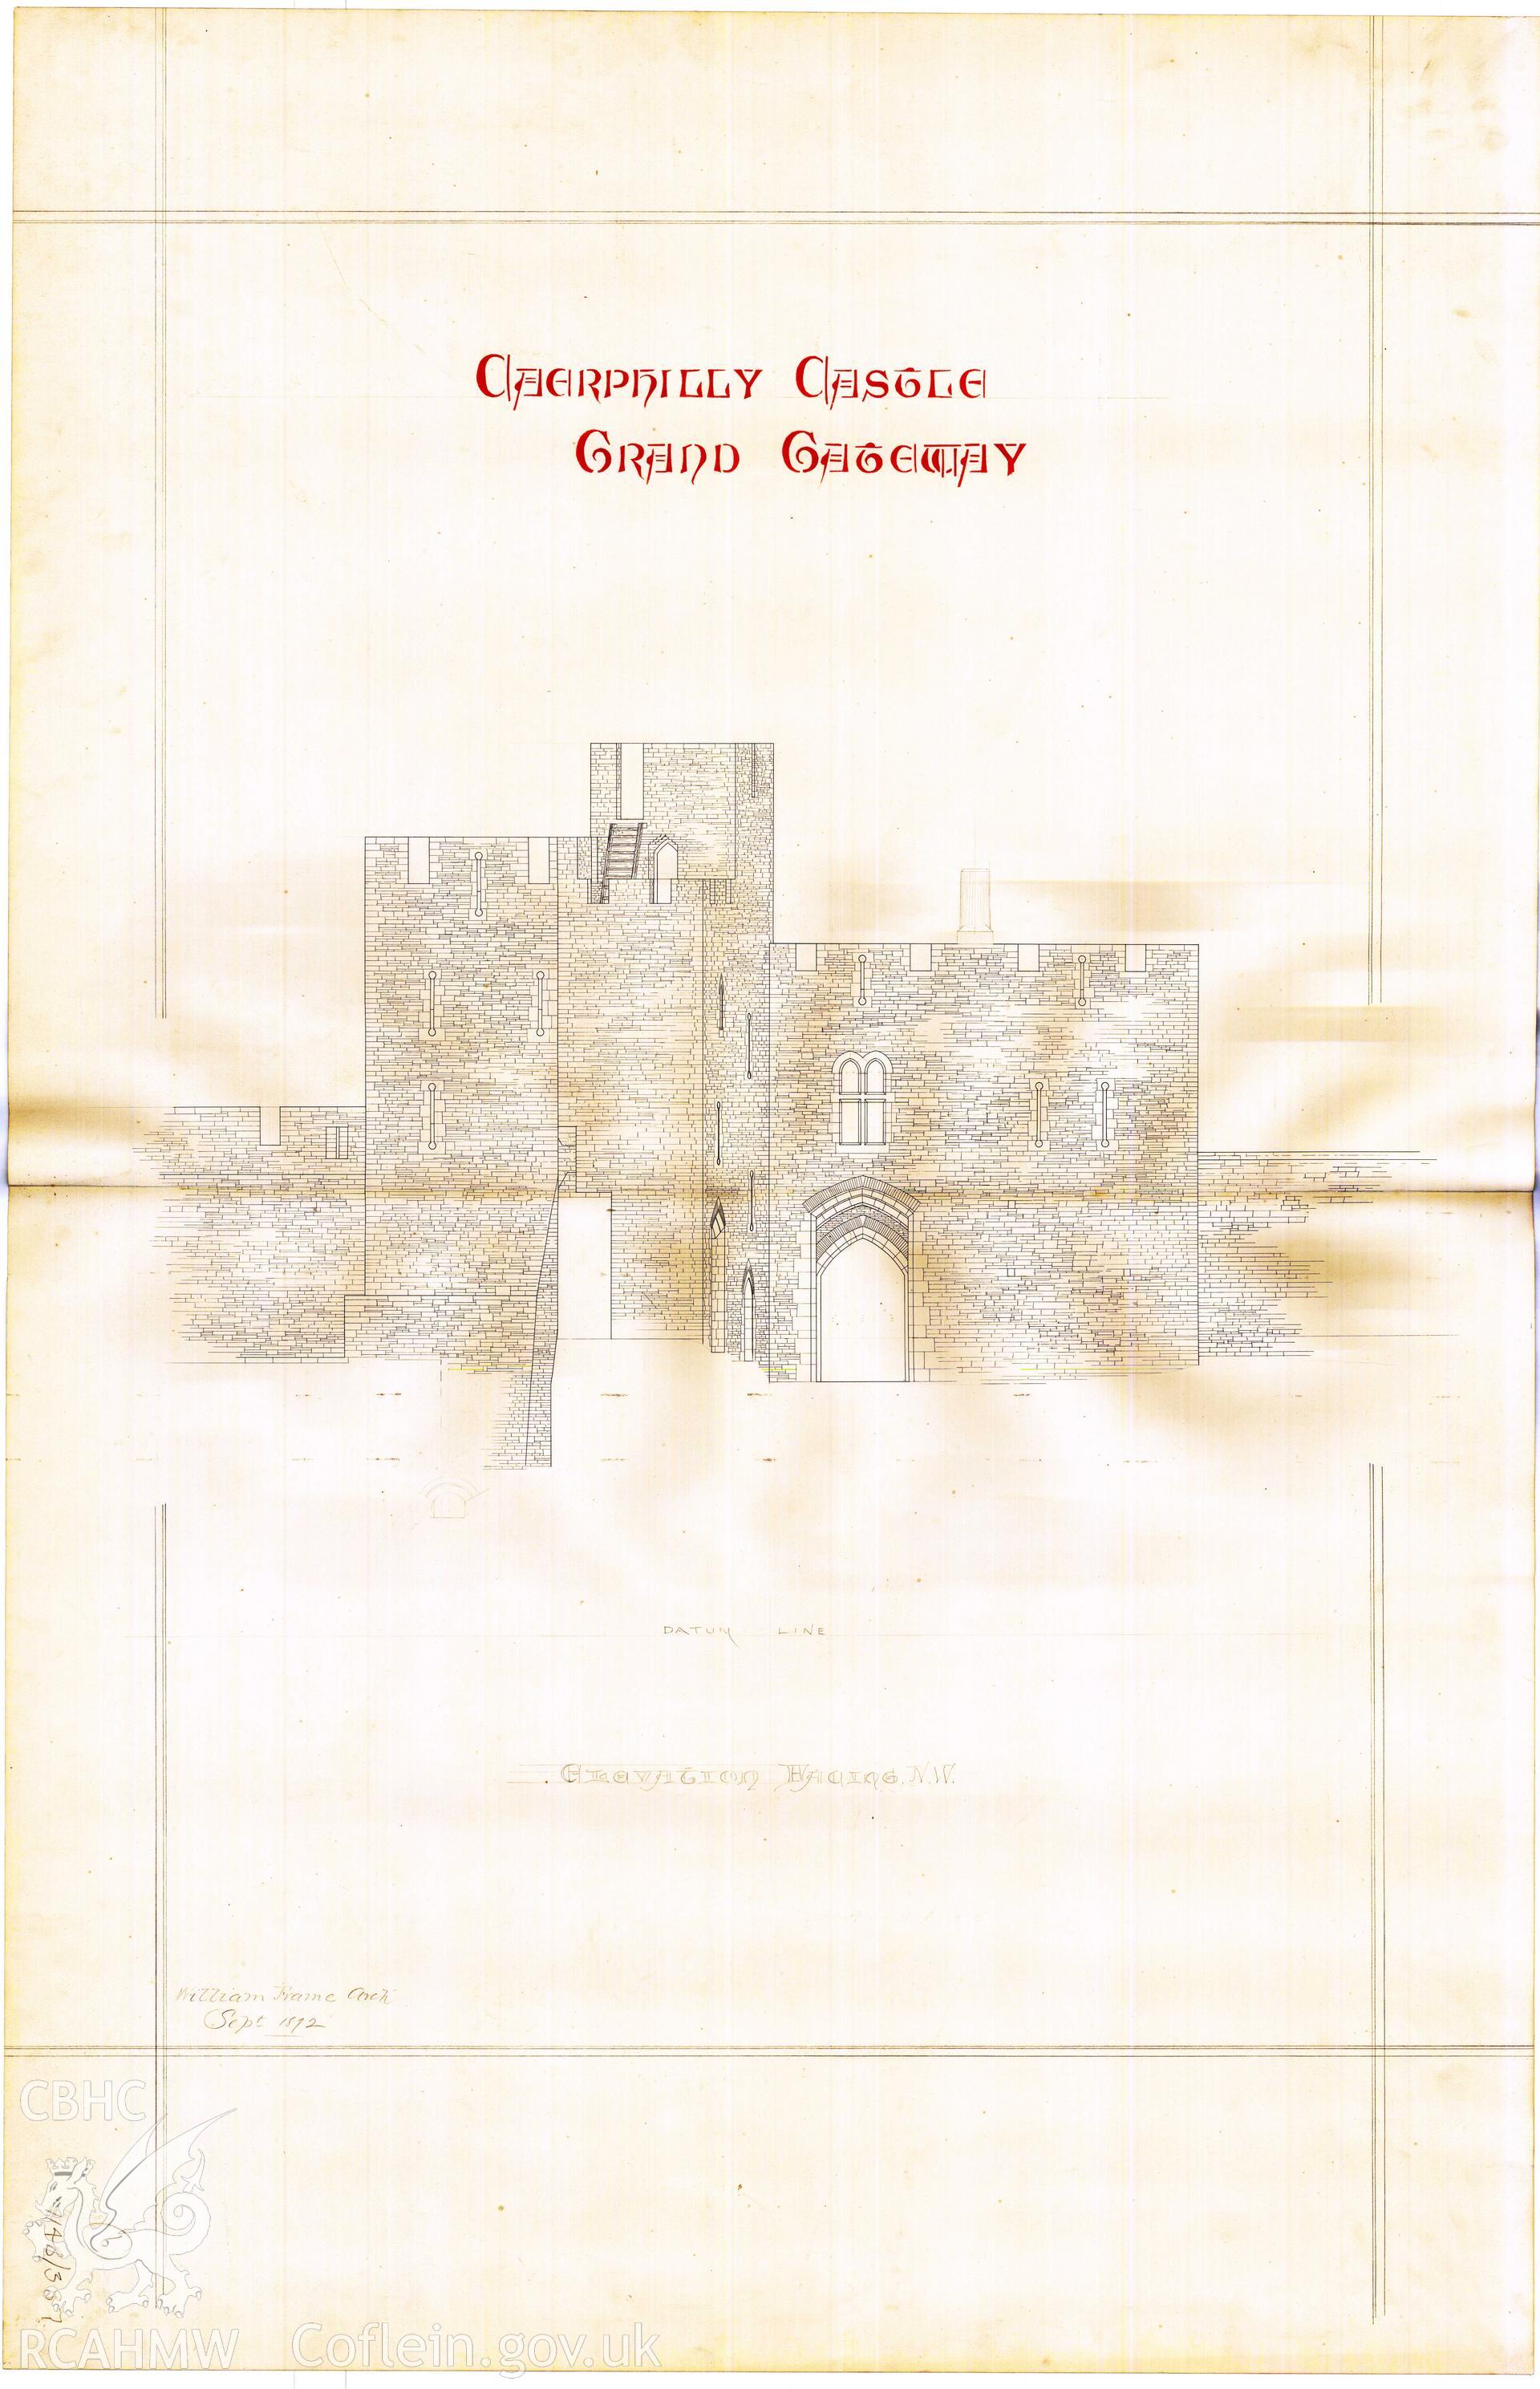 Cadw guardianship monument drawing of Caerphilly Castle. Grand Gateway. Cadw Ref. No:714B/387. Scale 1:96.